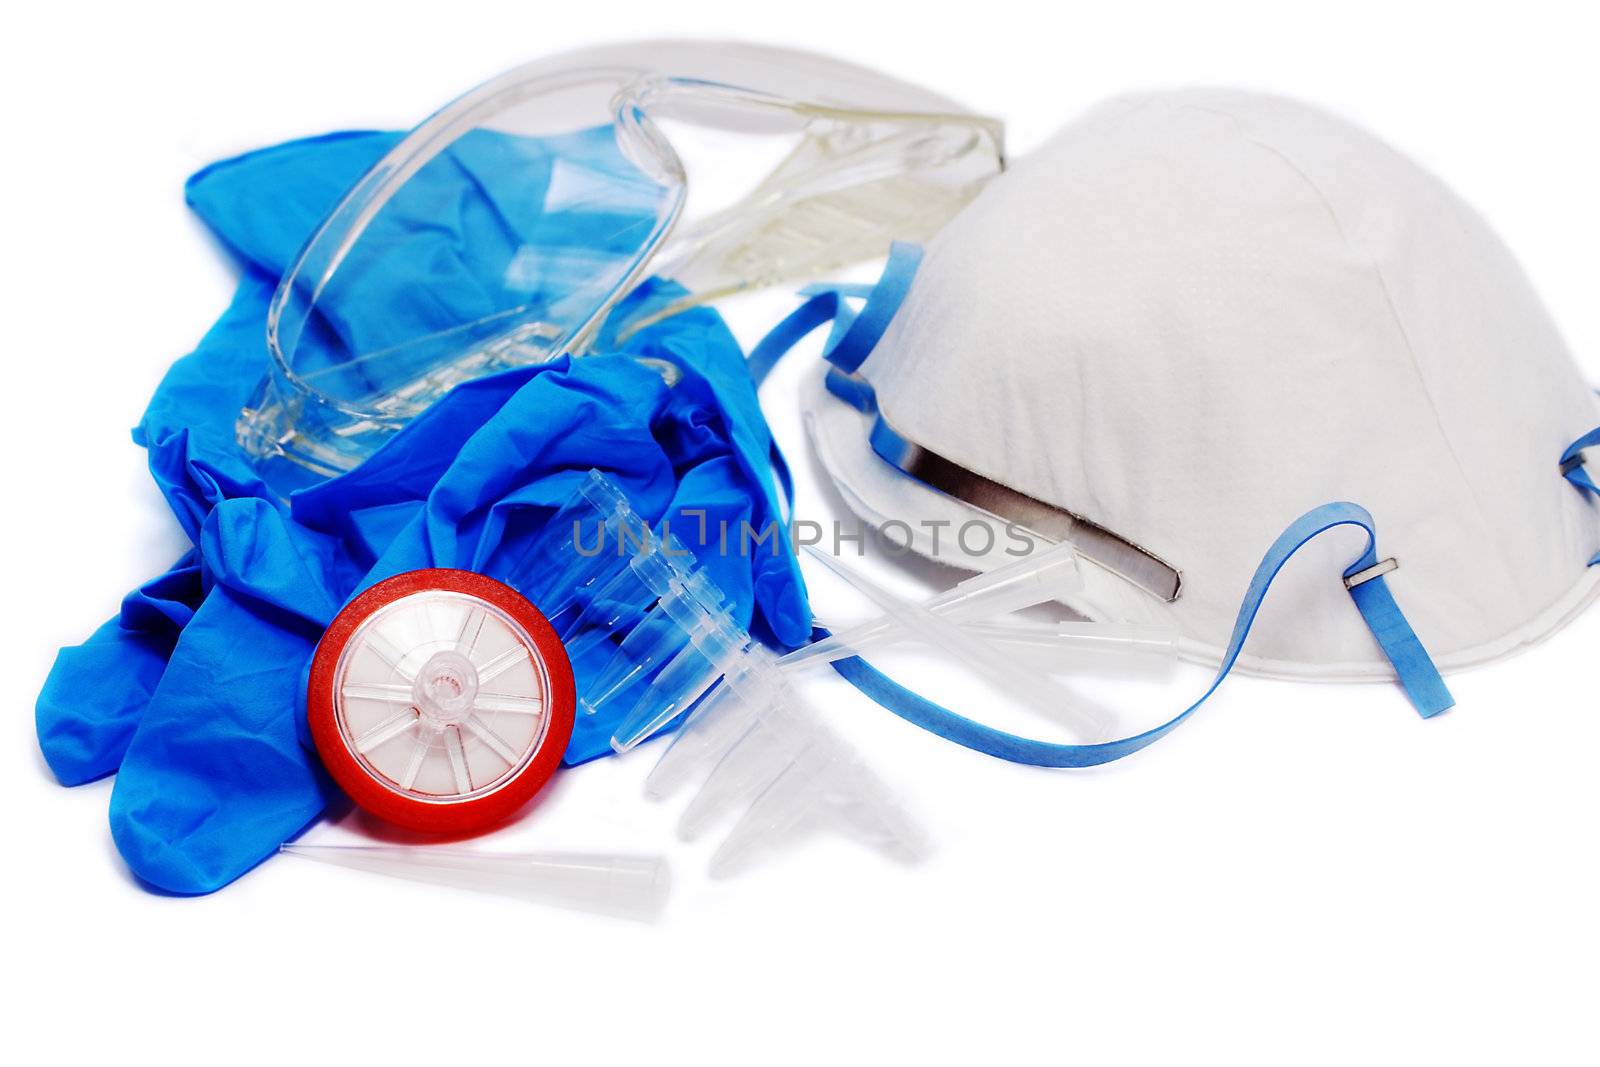 laboratory tools: plastic glasses, filter, gloves, antibacterial mask, tubes and tips